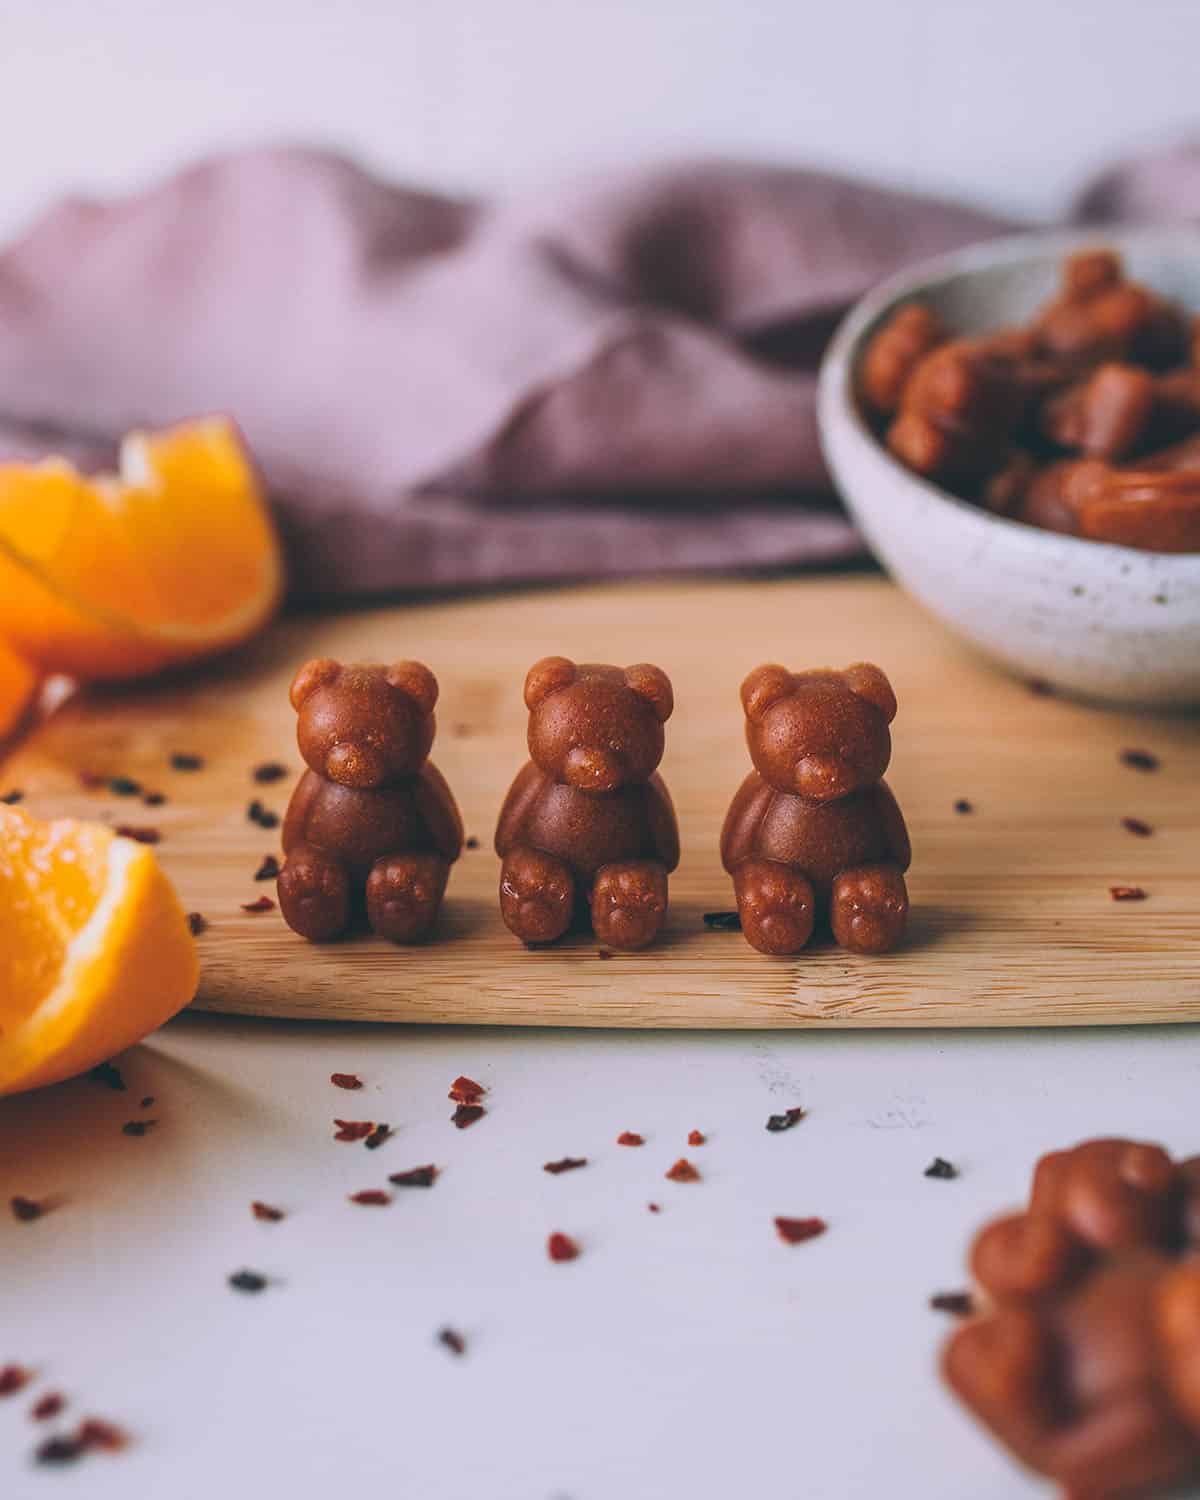 3 vitamin C gummy bears sitting up on a wooden cutting board, with orange slices surrounding.